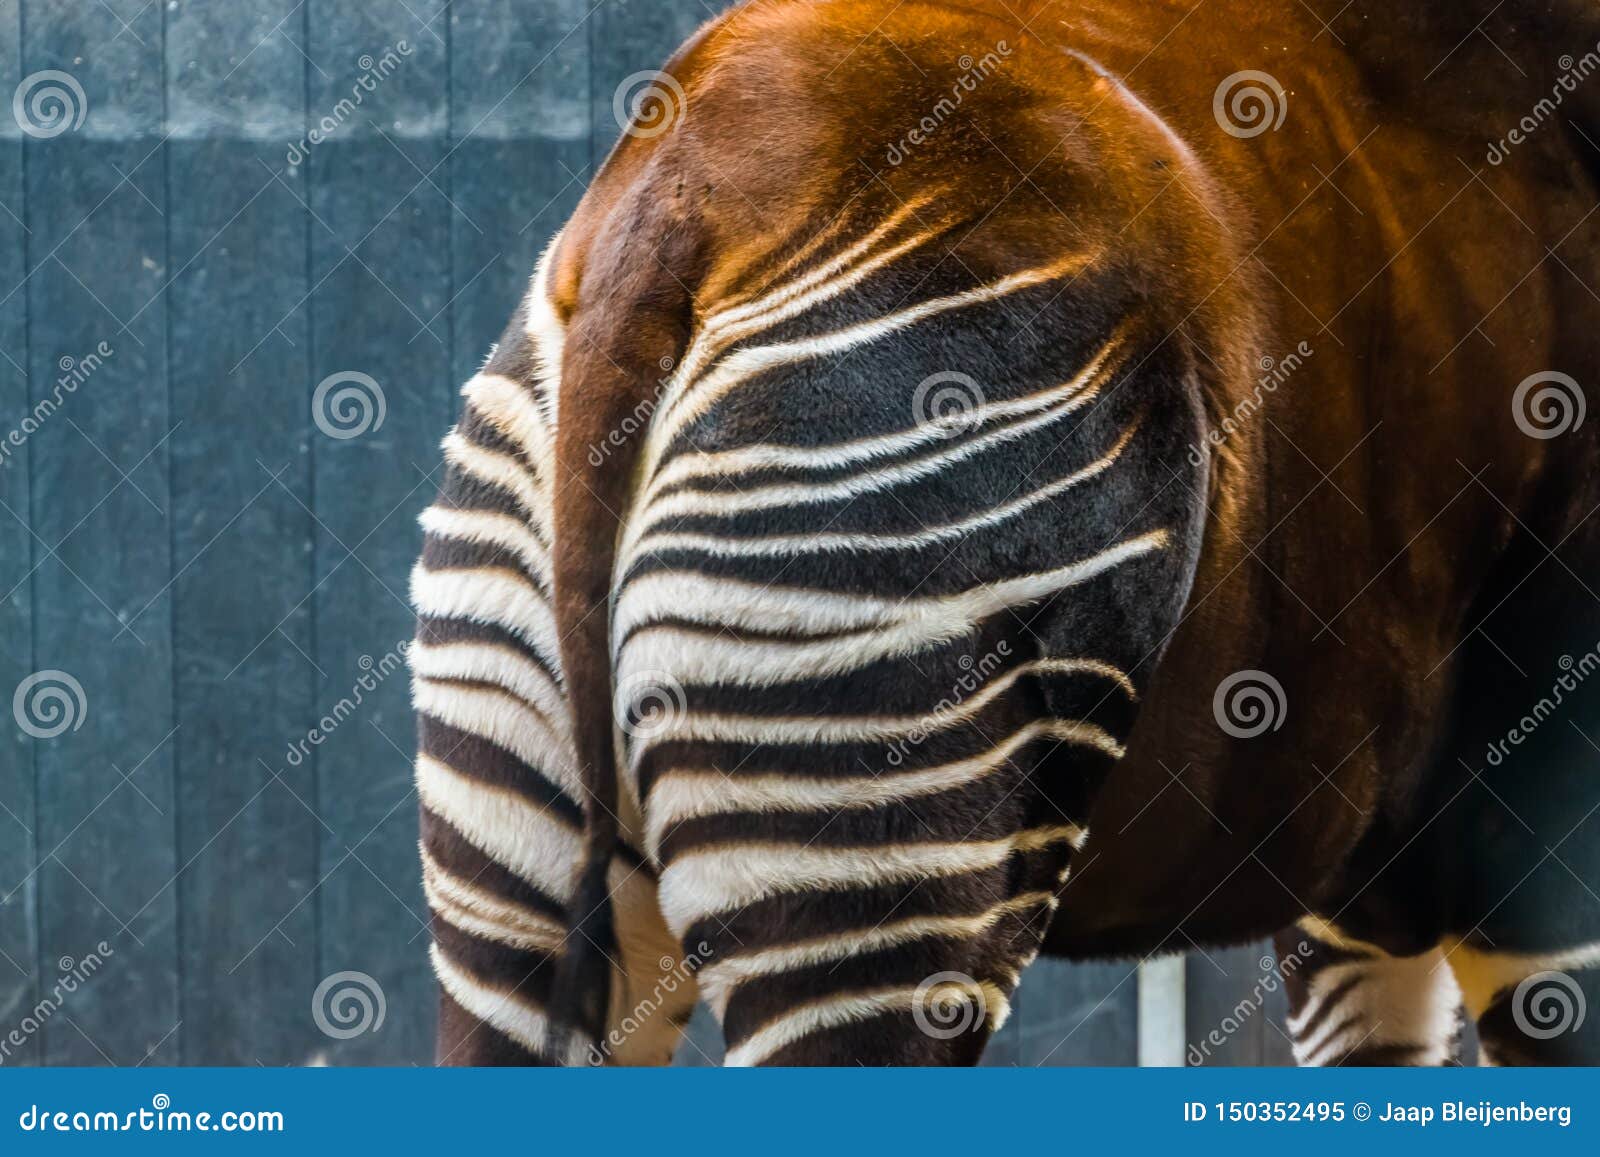 The Behind of a Okapi in Closeup, Tropical Giraffe Specie from Congo,  Animal Parts, Endangered Species Stock Image - Image of closeup,  conservation: 150352495